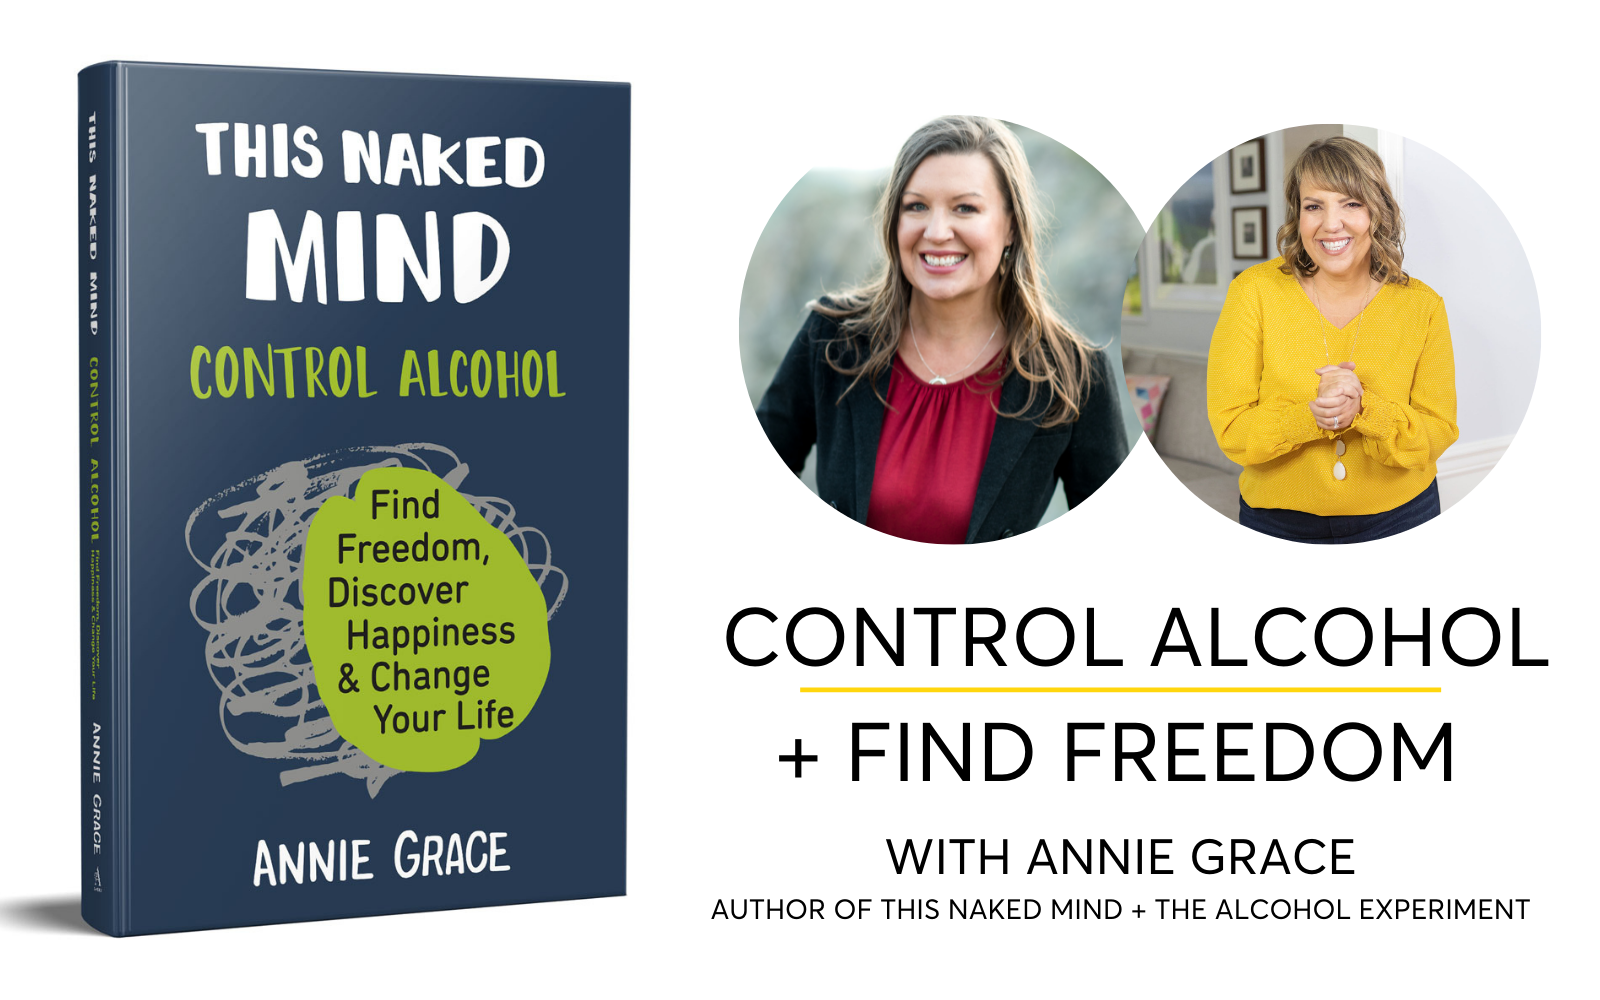 The Alcohol Experiment With Annie Grace